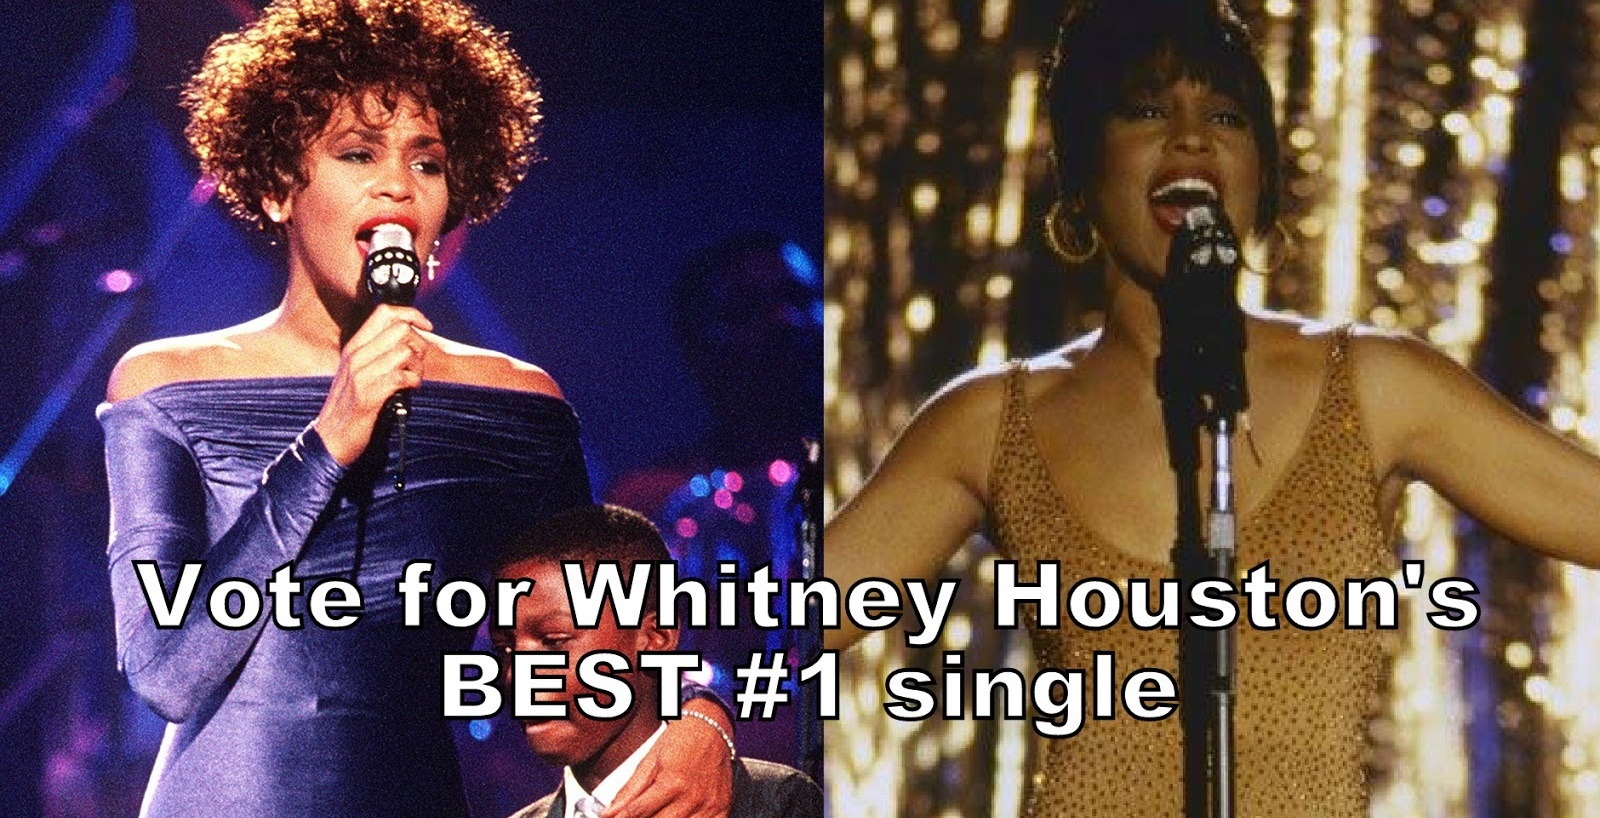 Poll: Which was Whitney Houston’s BEST number 1 single? Vote here.